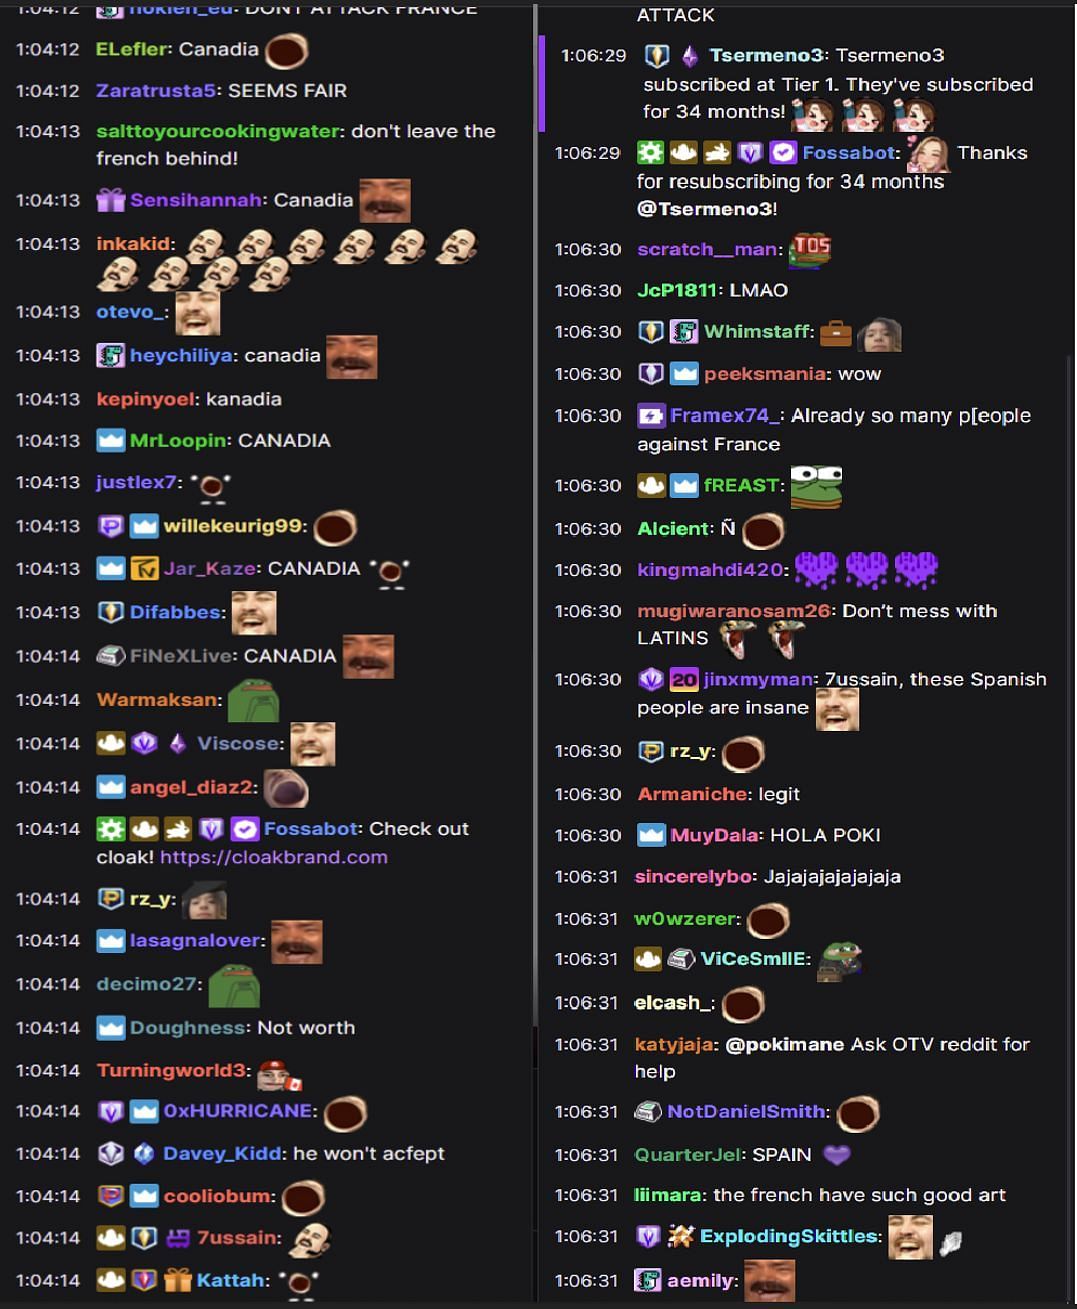 Fans reacting to the streamer&#039;s conversation (Image via Pokimane/Twitch chat)